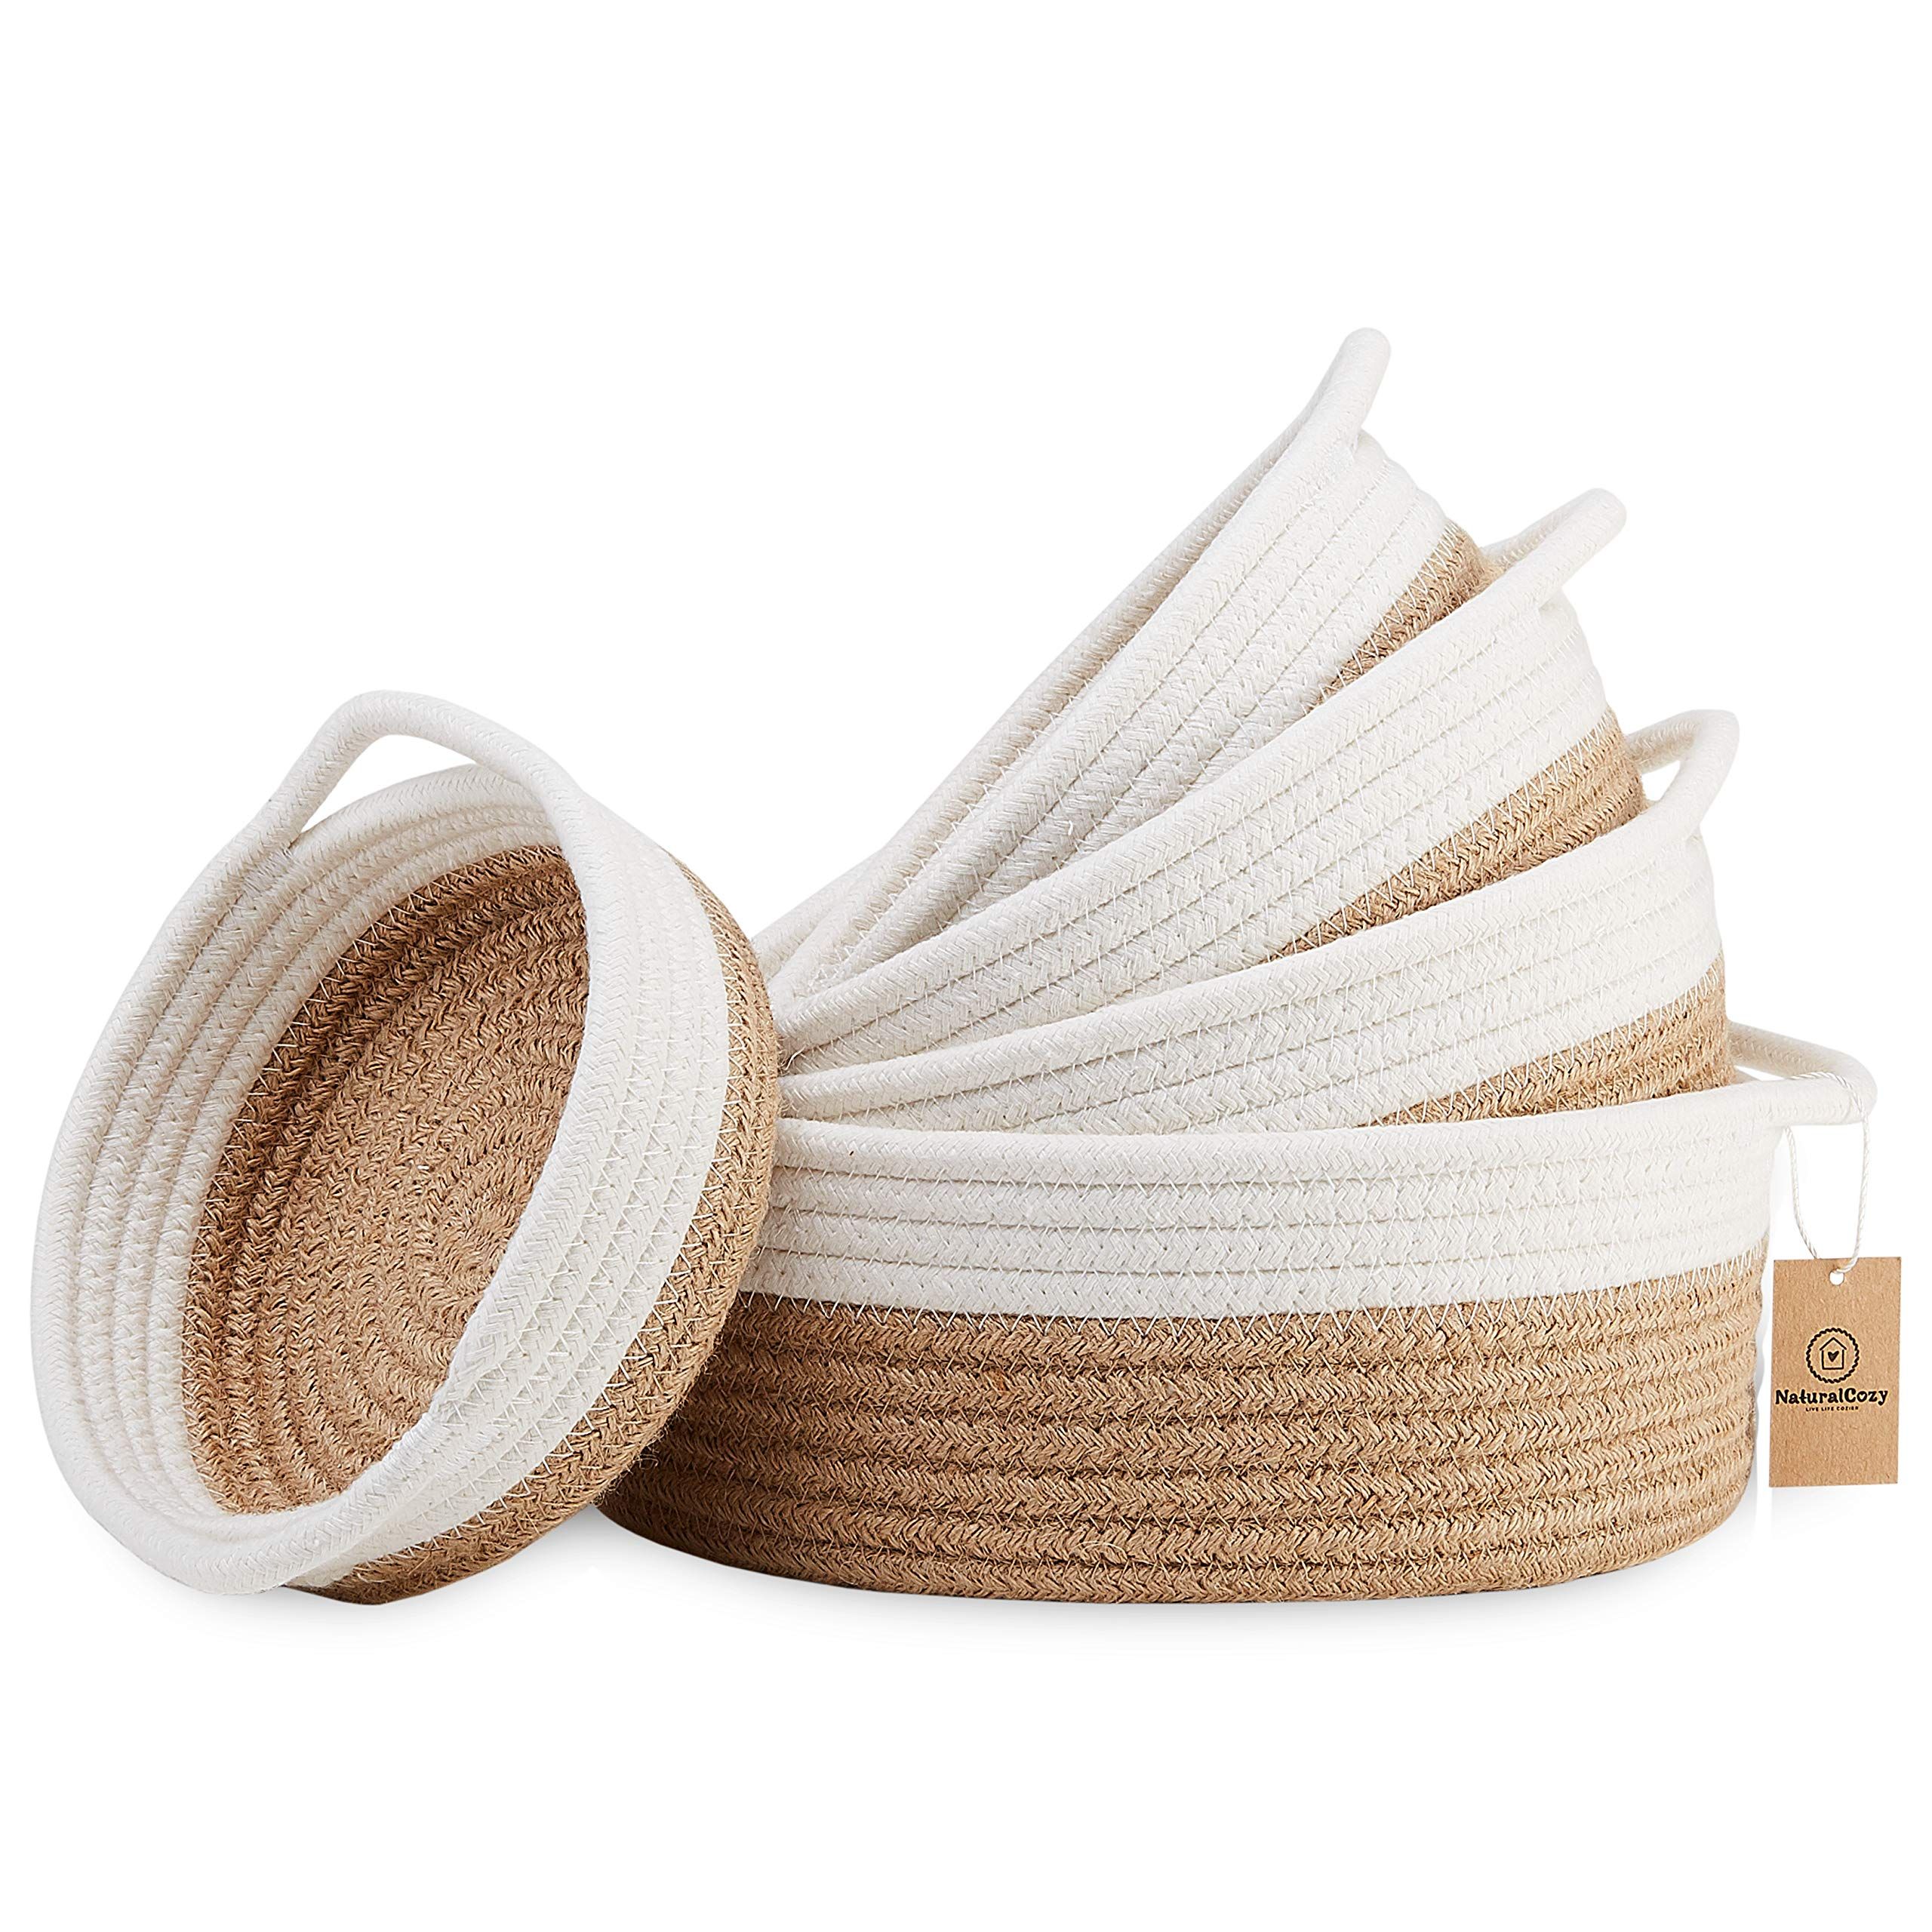 NaturalCozy 5-Piece Round Small Woven Baskets Set - 100% Natural Cotton Rope Baskets! Key Tray, K... | Amazon (US)